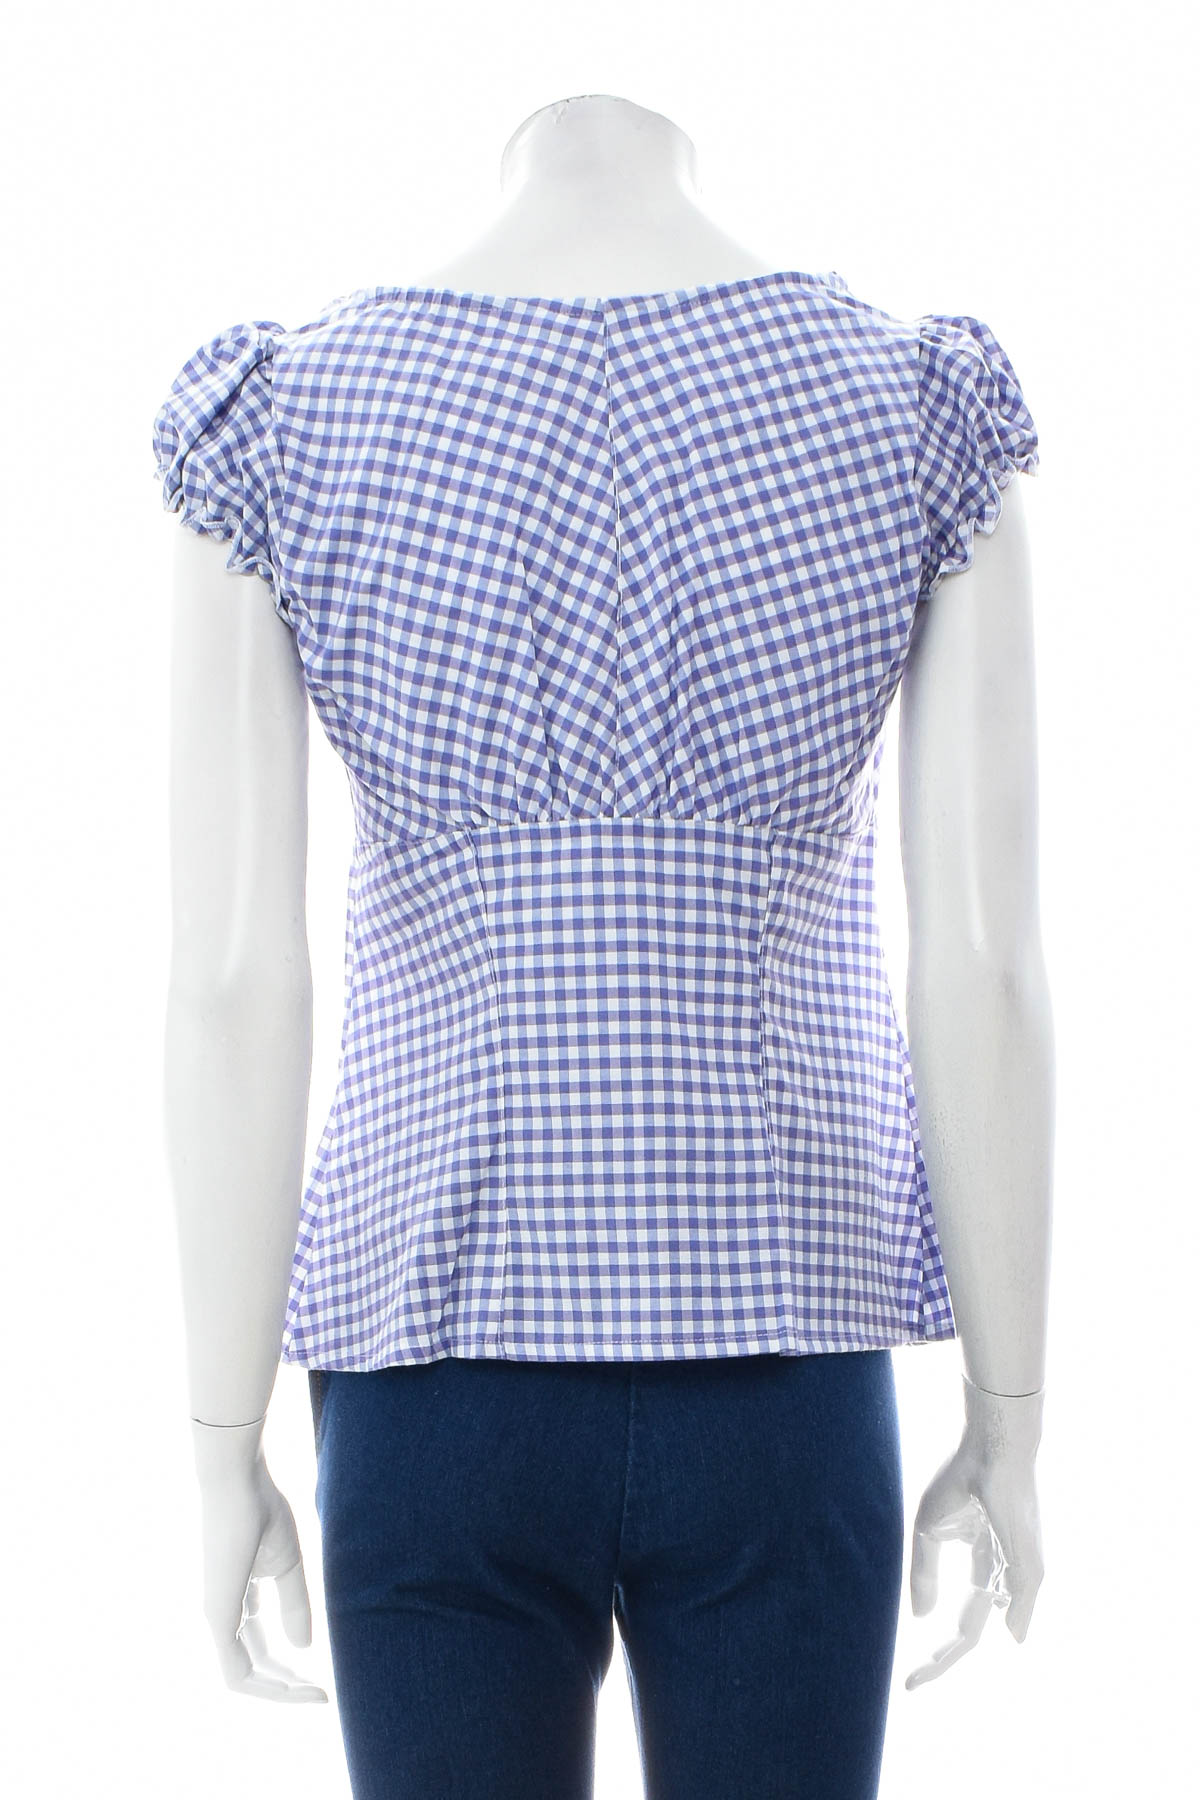 Women's shirt - Ludwig & Therese - 1